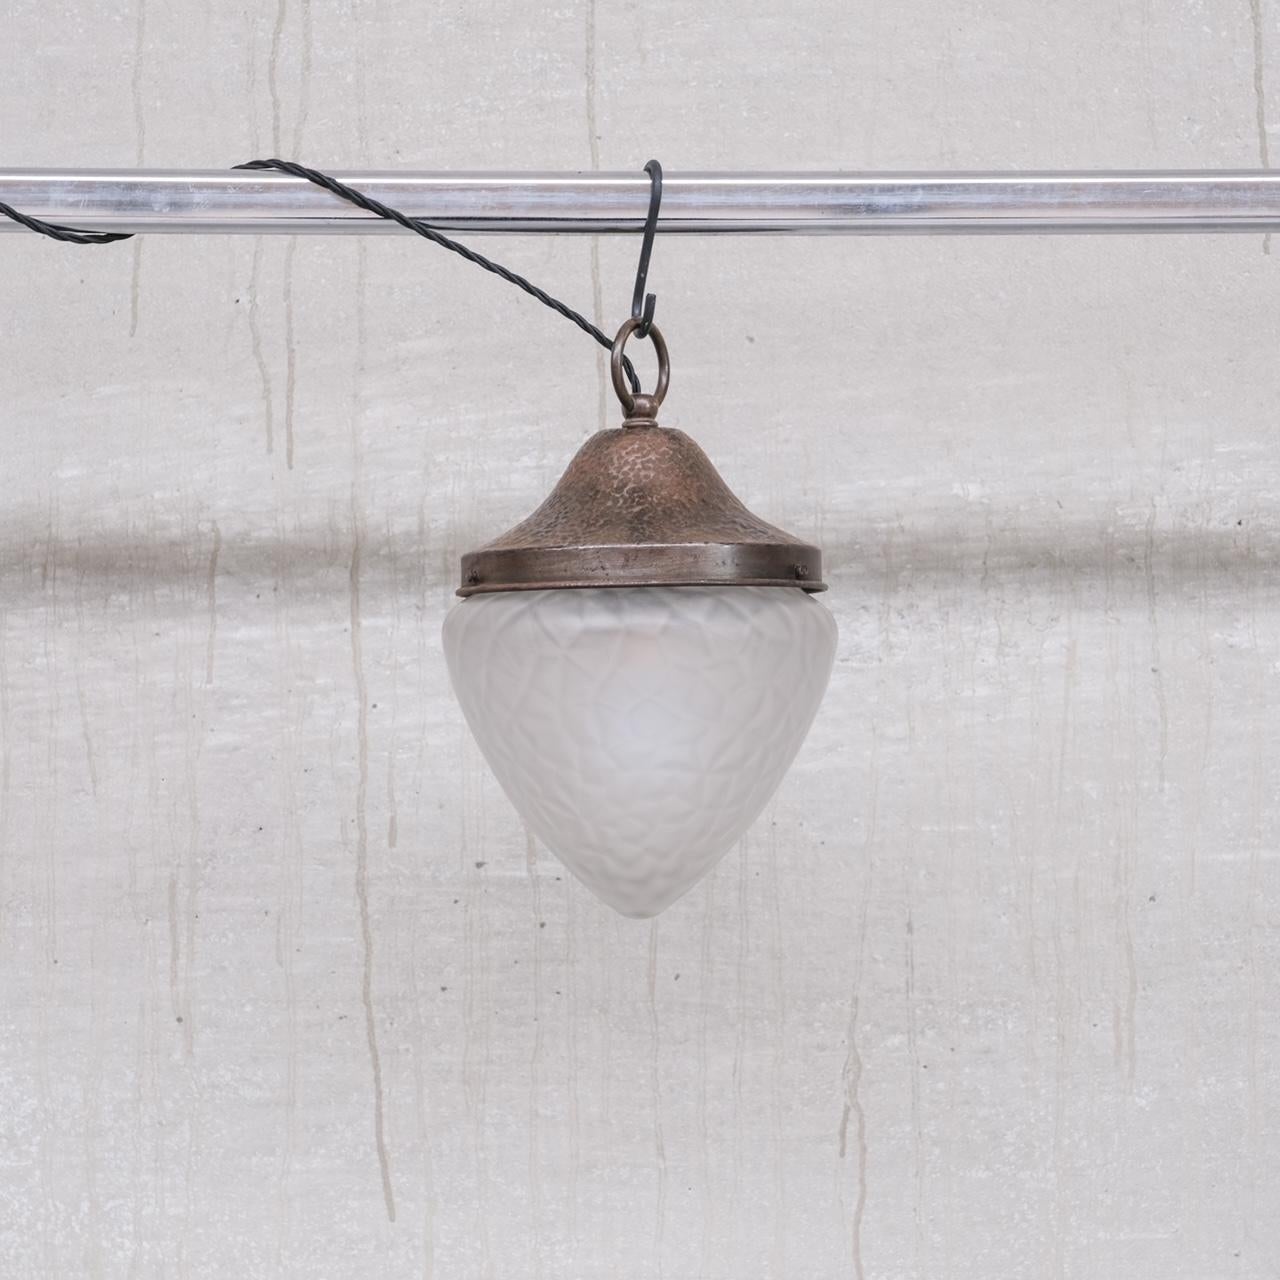 A curios opaque glass pendant light, with hand hammered metal gallery. 

France, c1930s. 

Good vintage condition, patina commensurate with age. 

Re-wired and PAT tested. 

No original chain or rose was retained but these are sourced easily